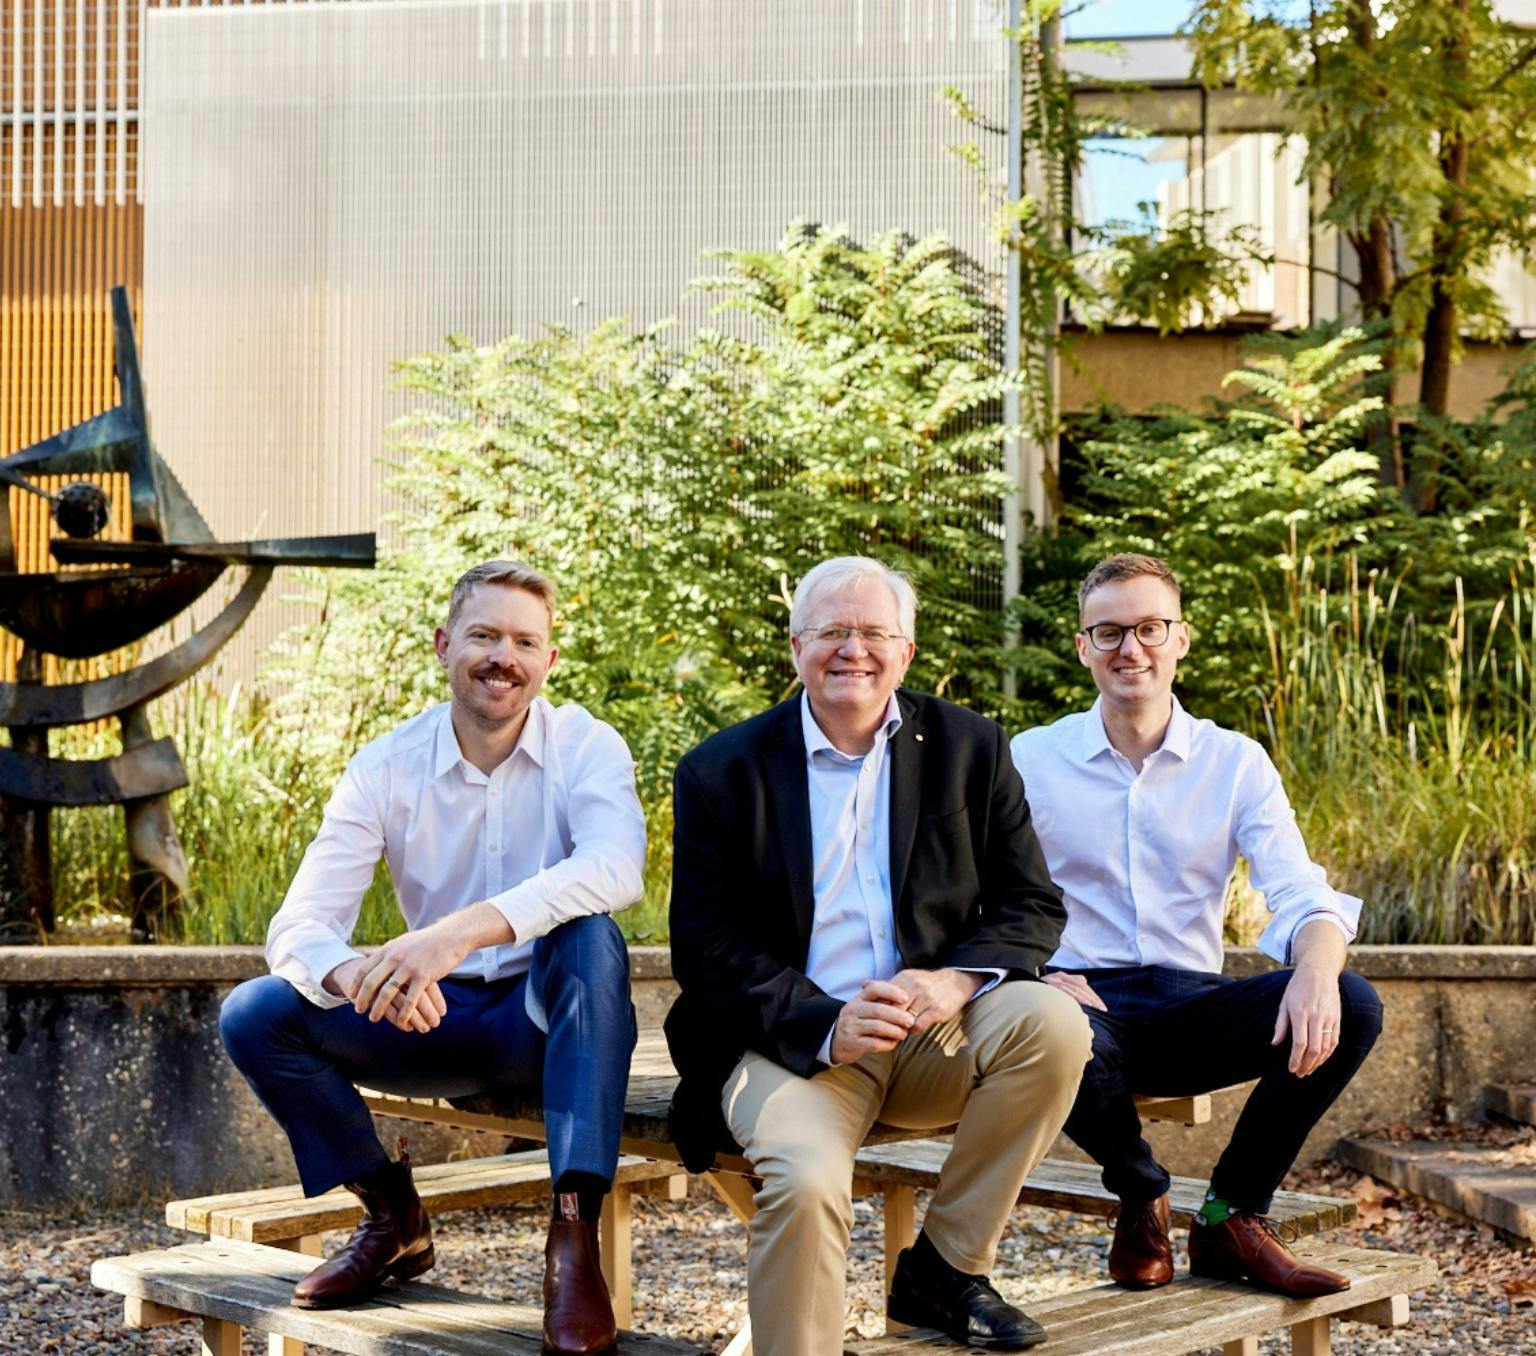 THree men are in business casual clothing and sitting on a picnic table bench smiling at the camera